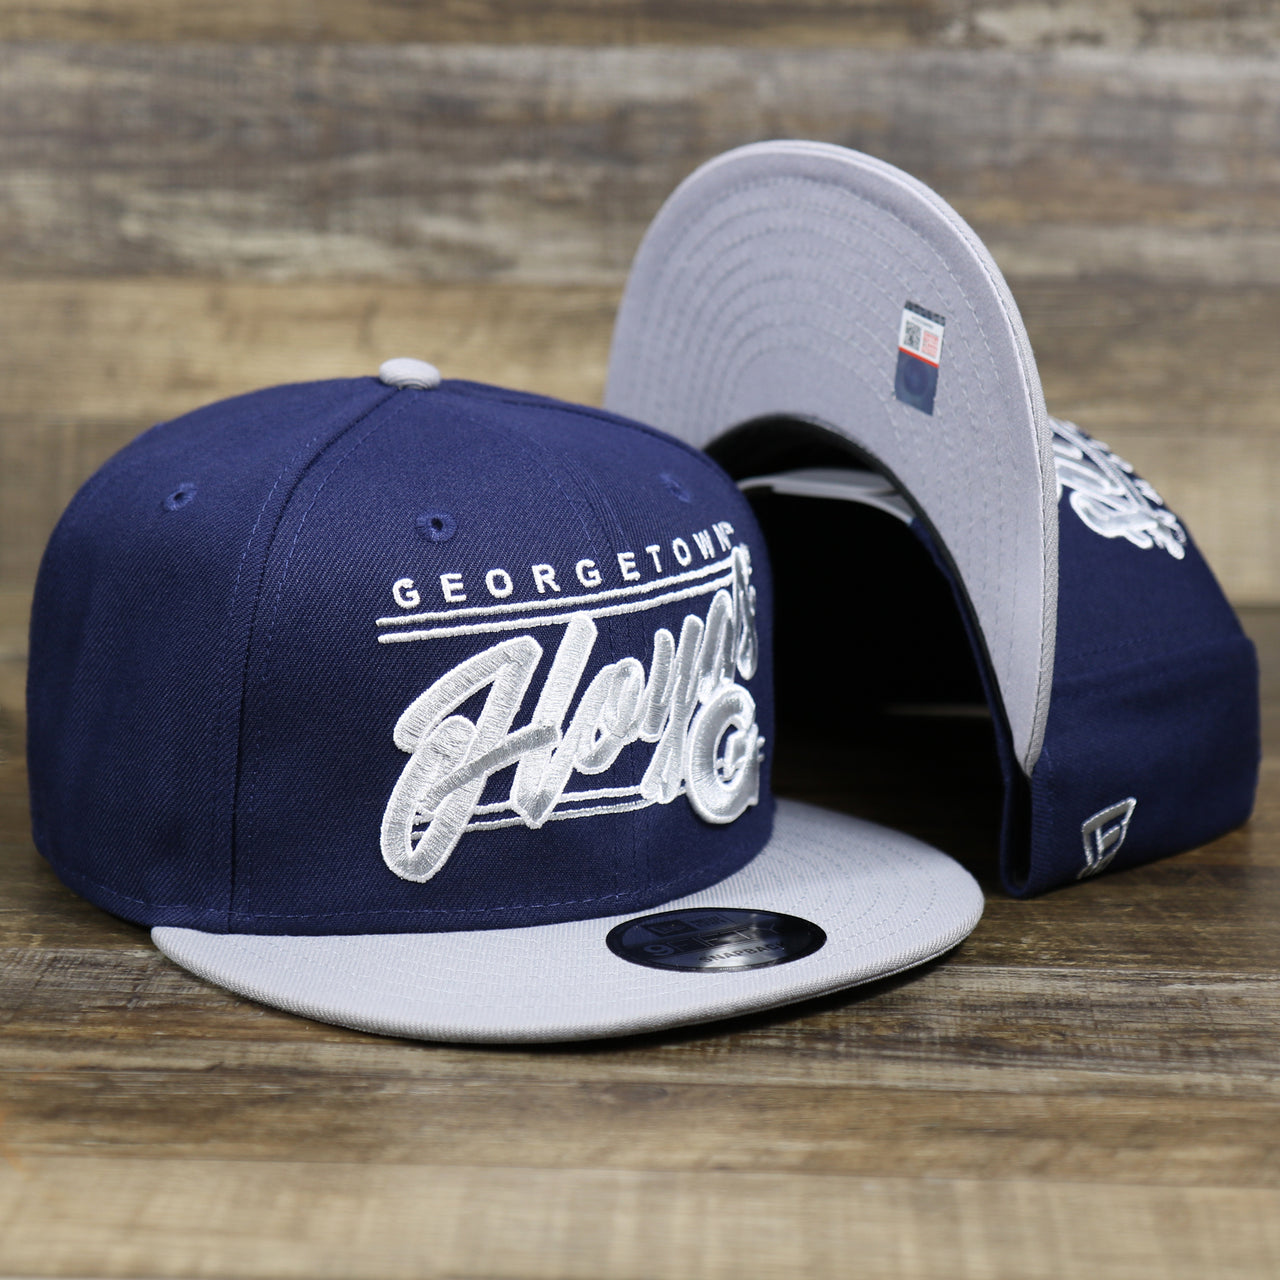 The Georgetown Hoyas Team Script Gray Bottom 9Fifty Snapback | Navy Blue And Gray Snap Cap